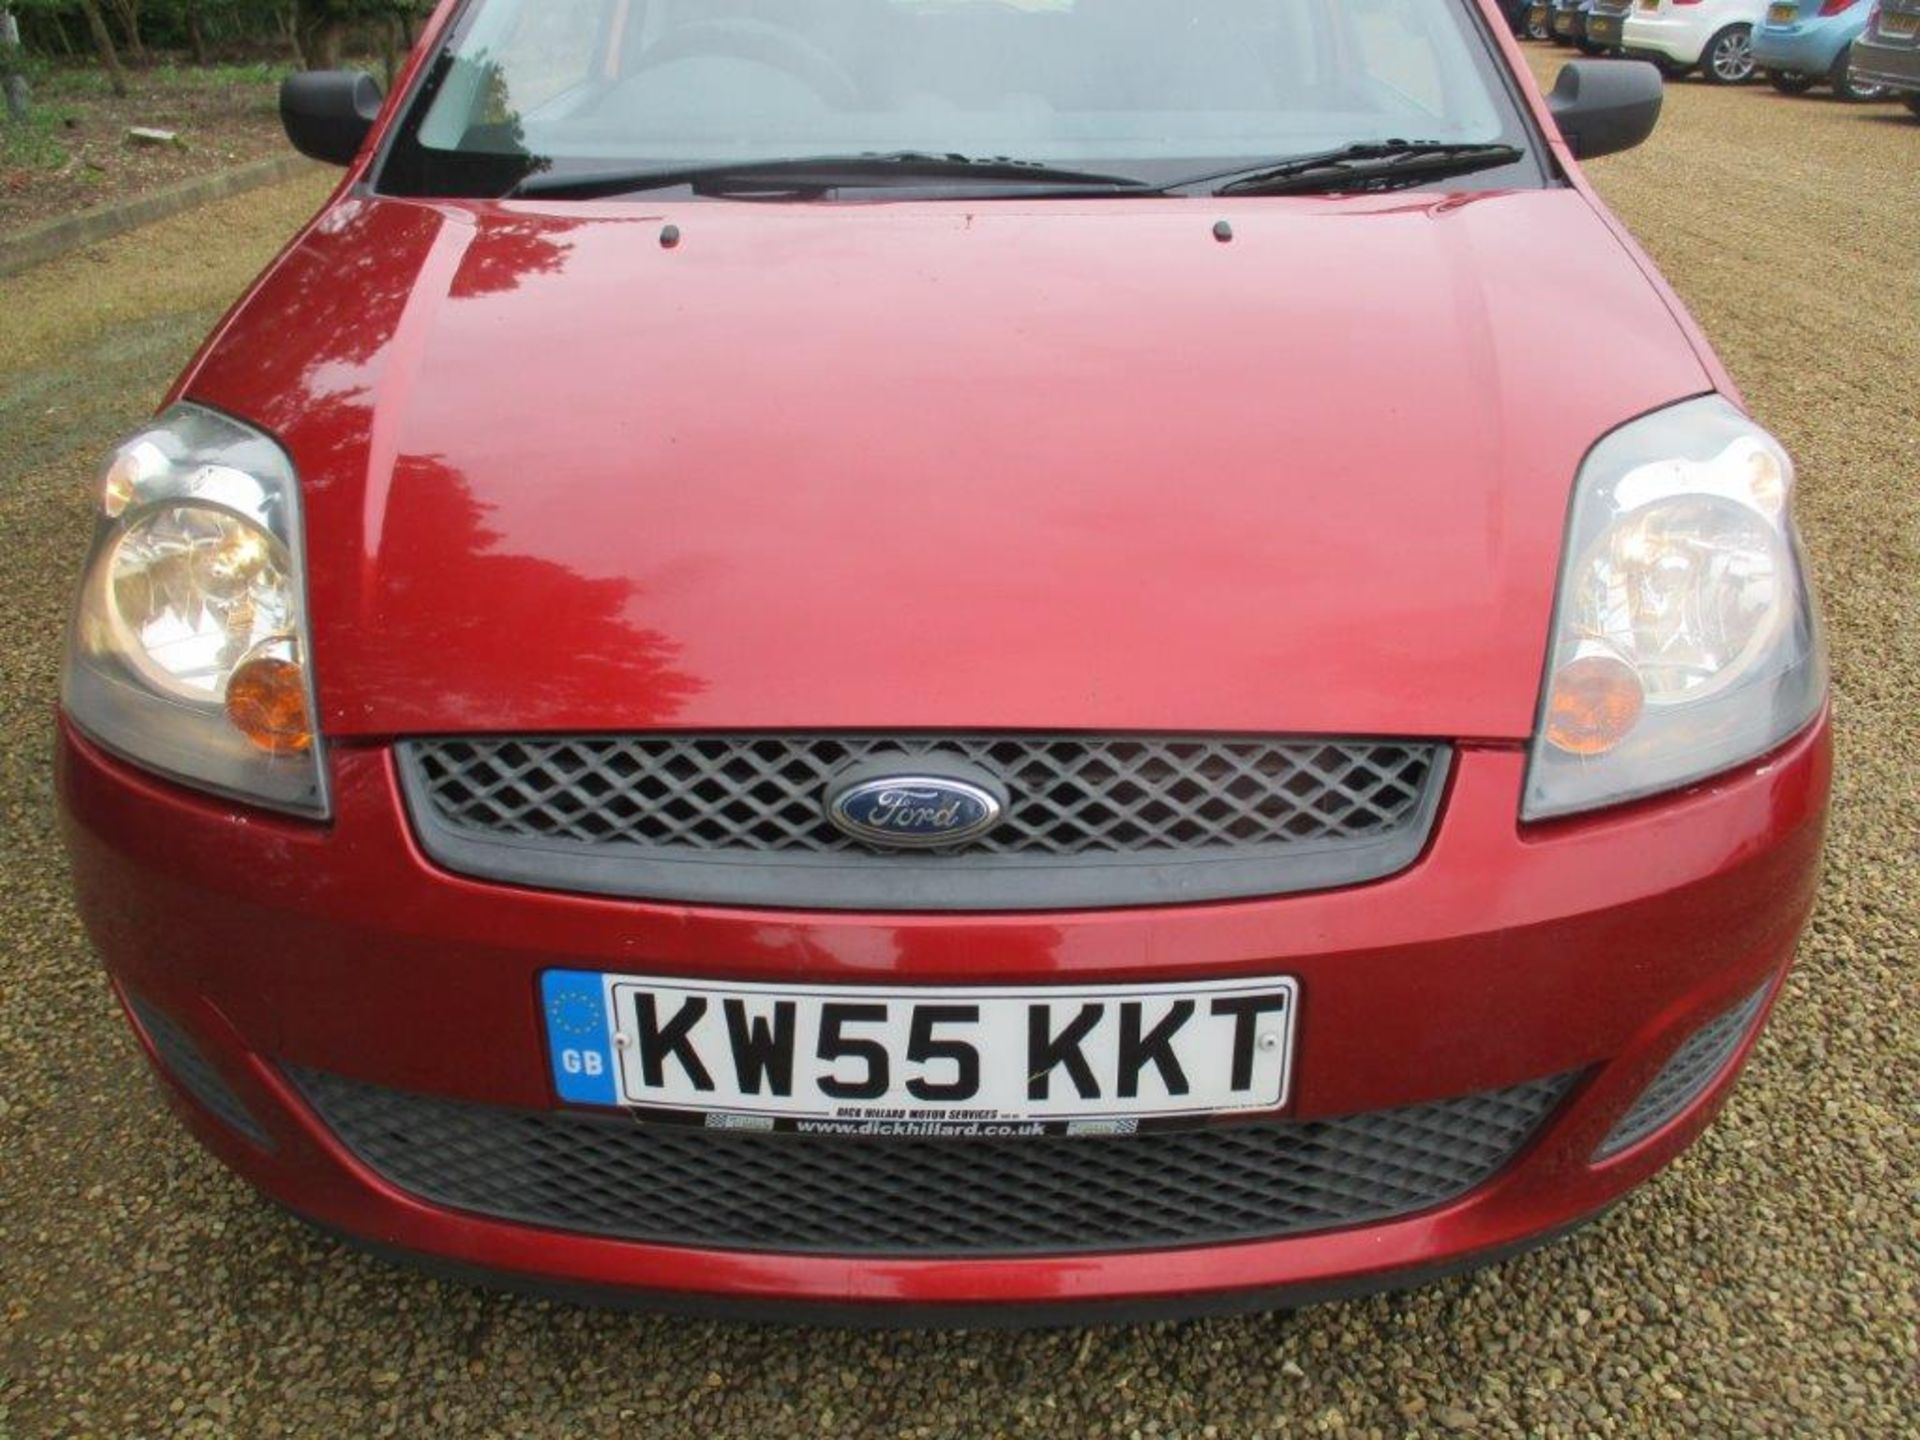 06 55 Ford Fiesta Style 3dr - Image 4 of 18